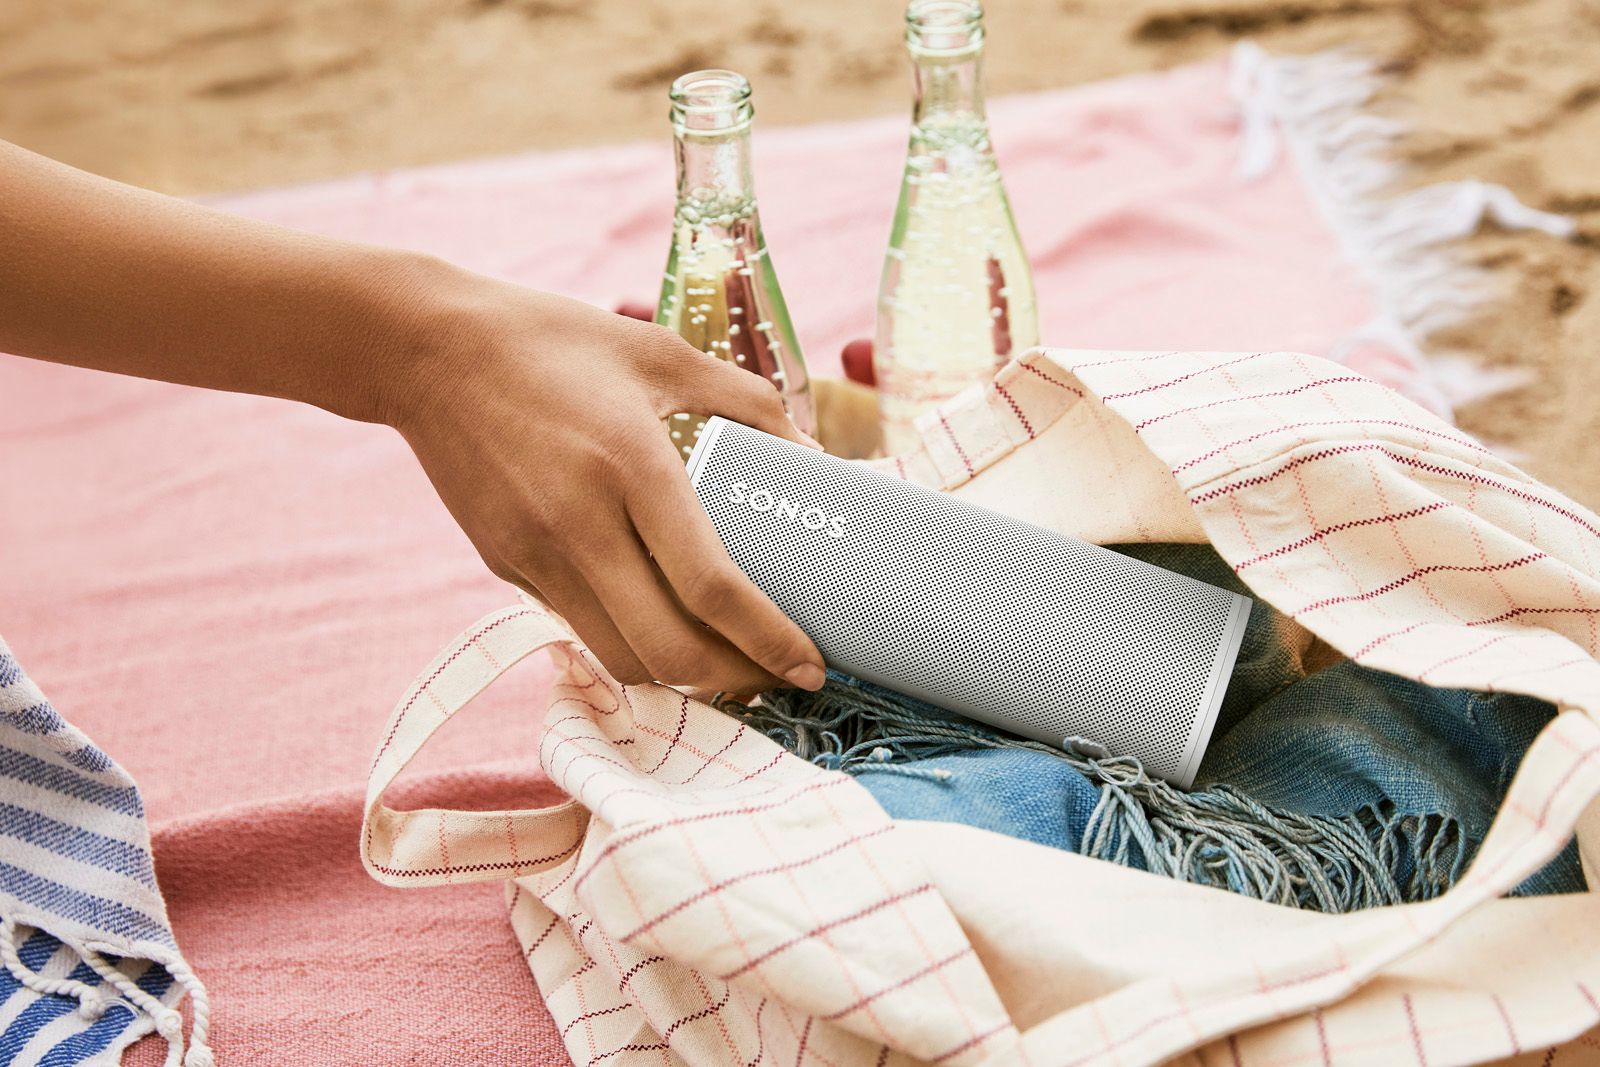 Sonos Roam 2 is coming soon: 7 features we want